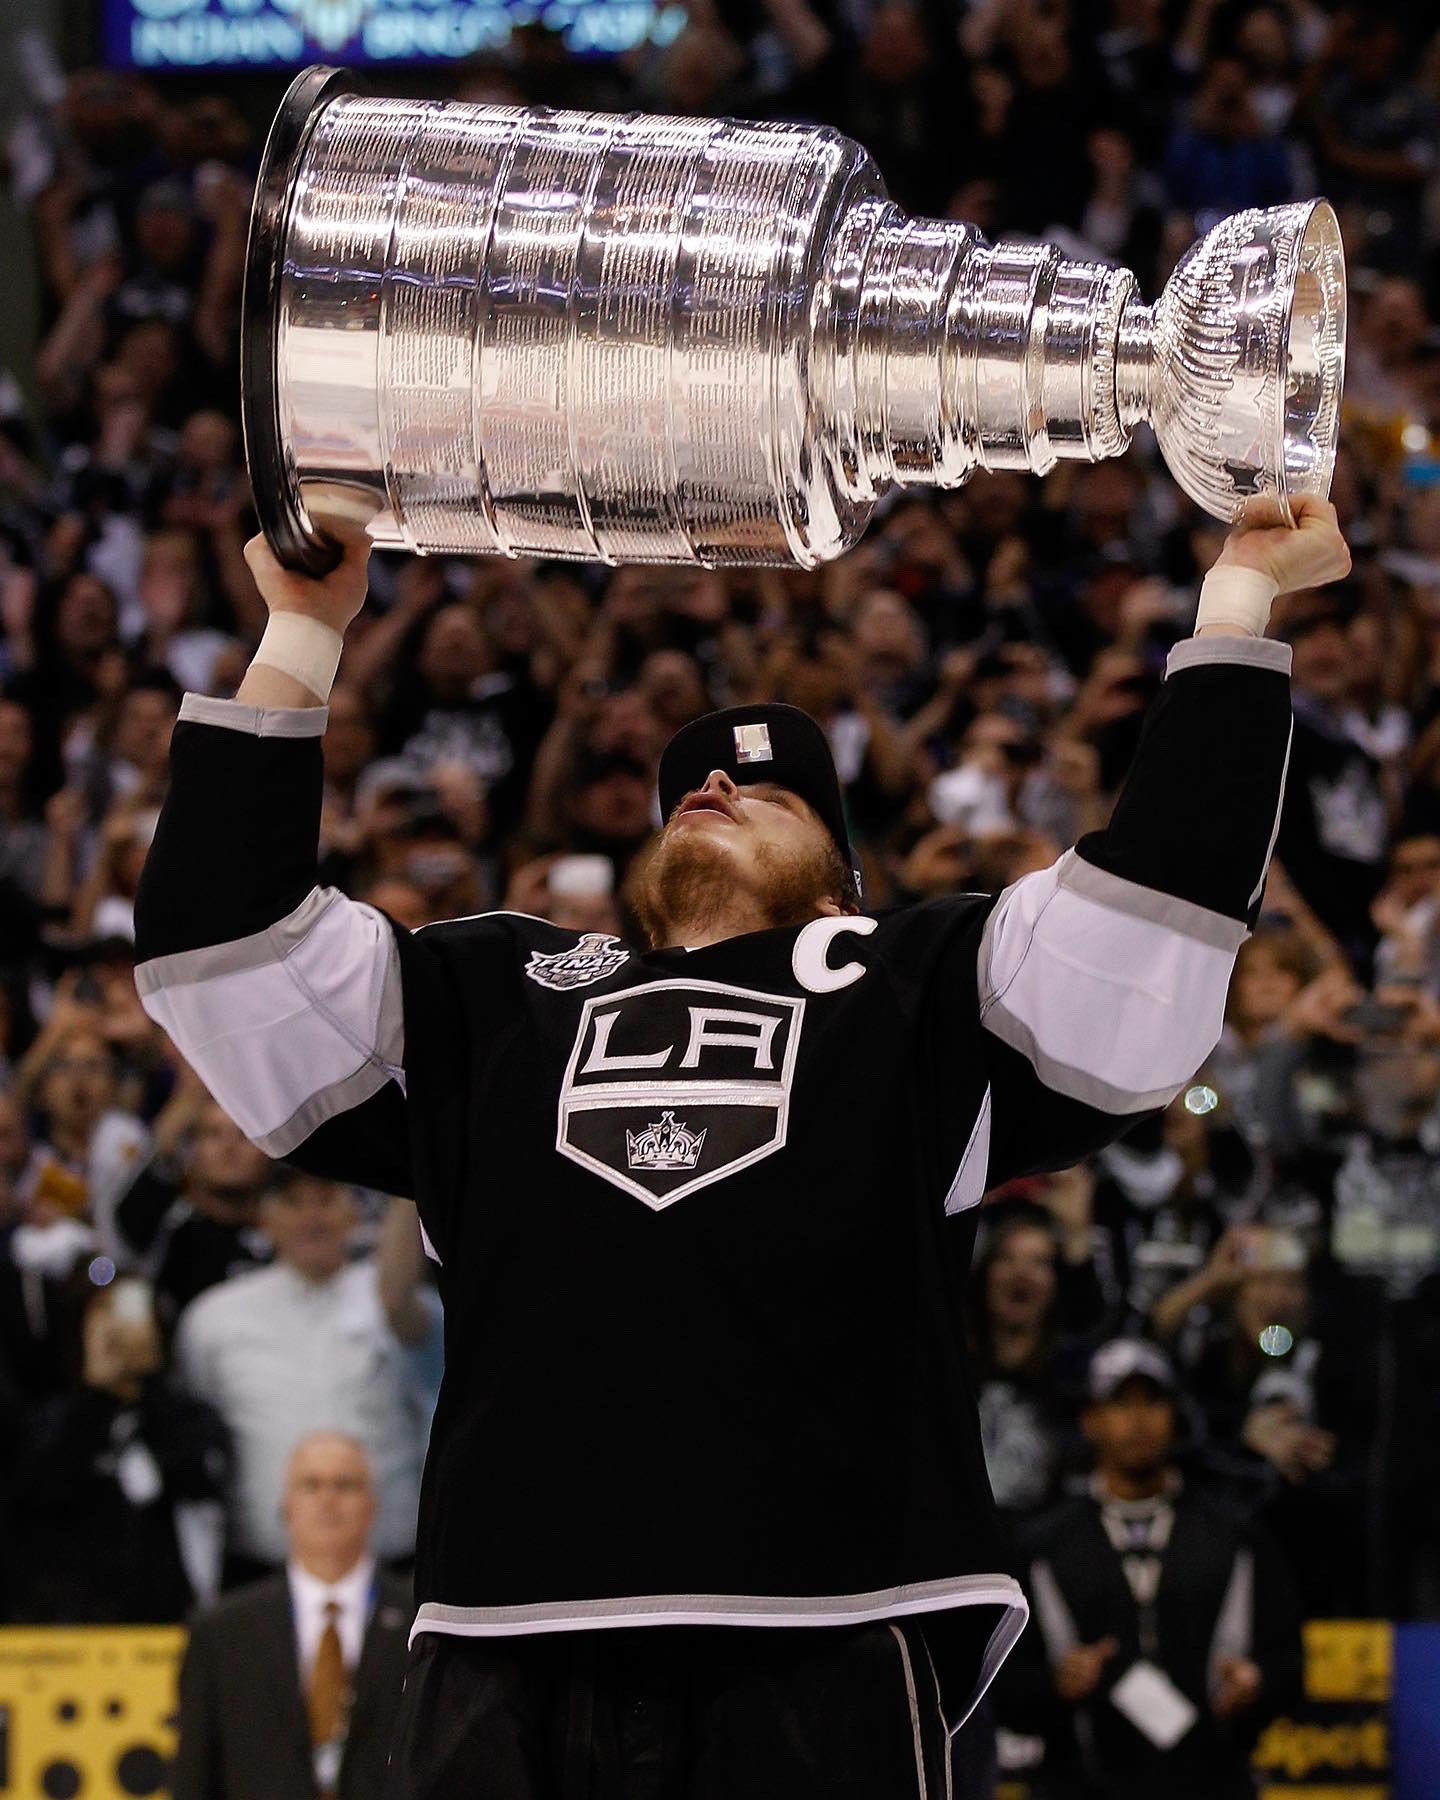 Twitter reacts to Dustin Brown's jersey retirement, statue